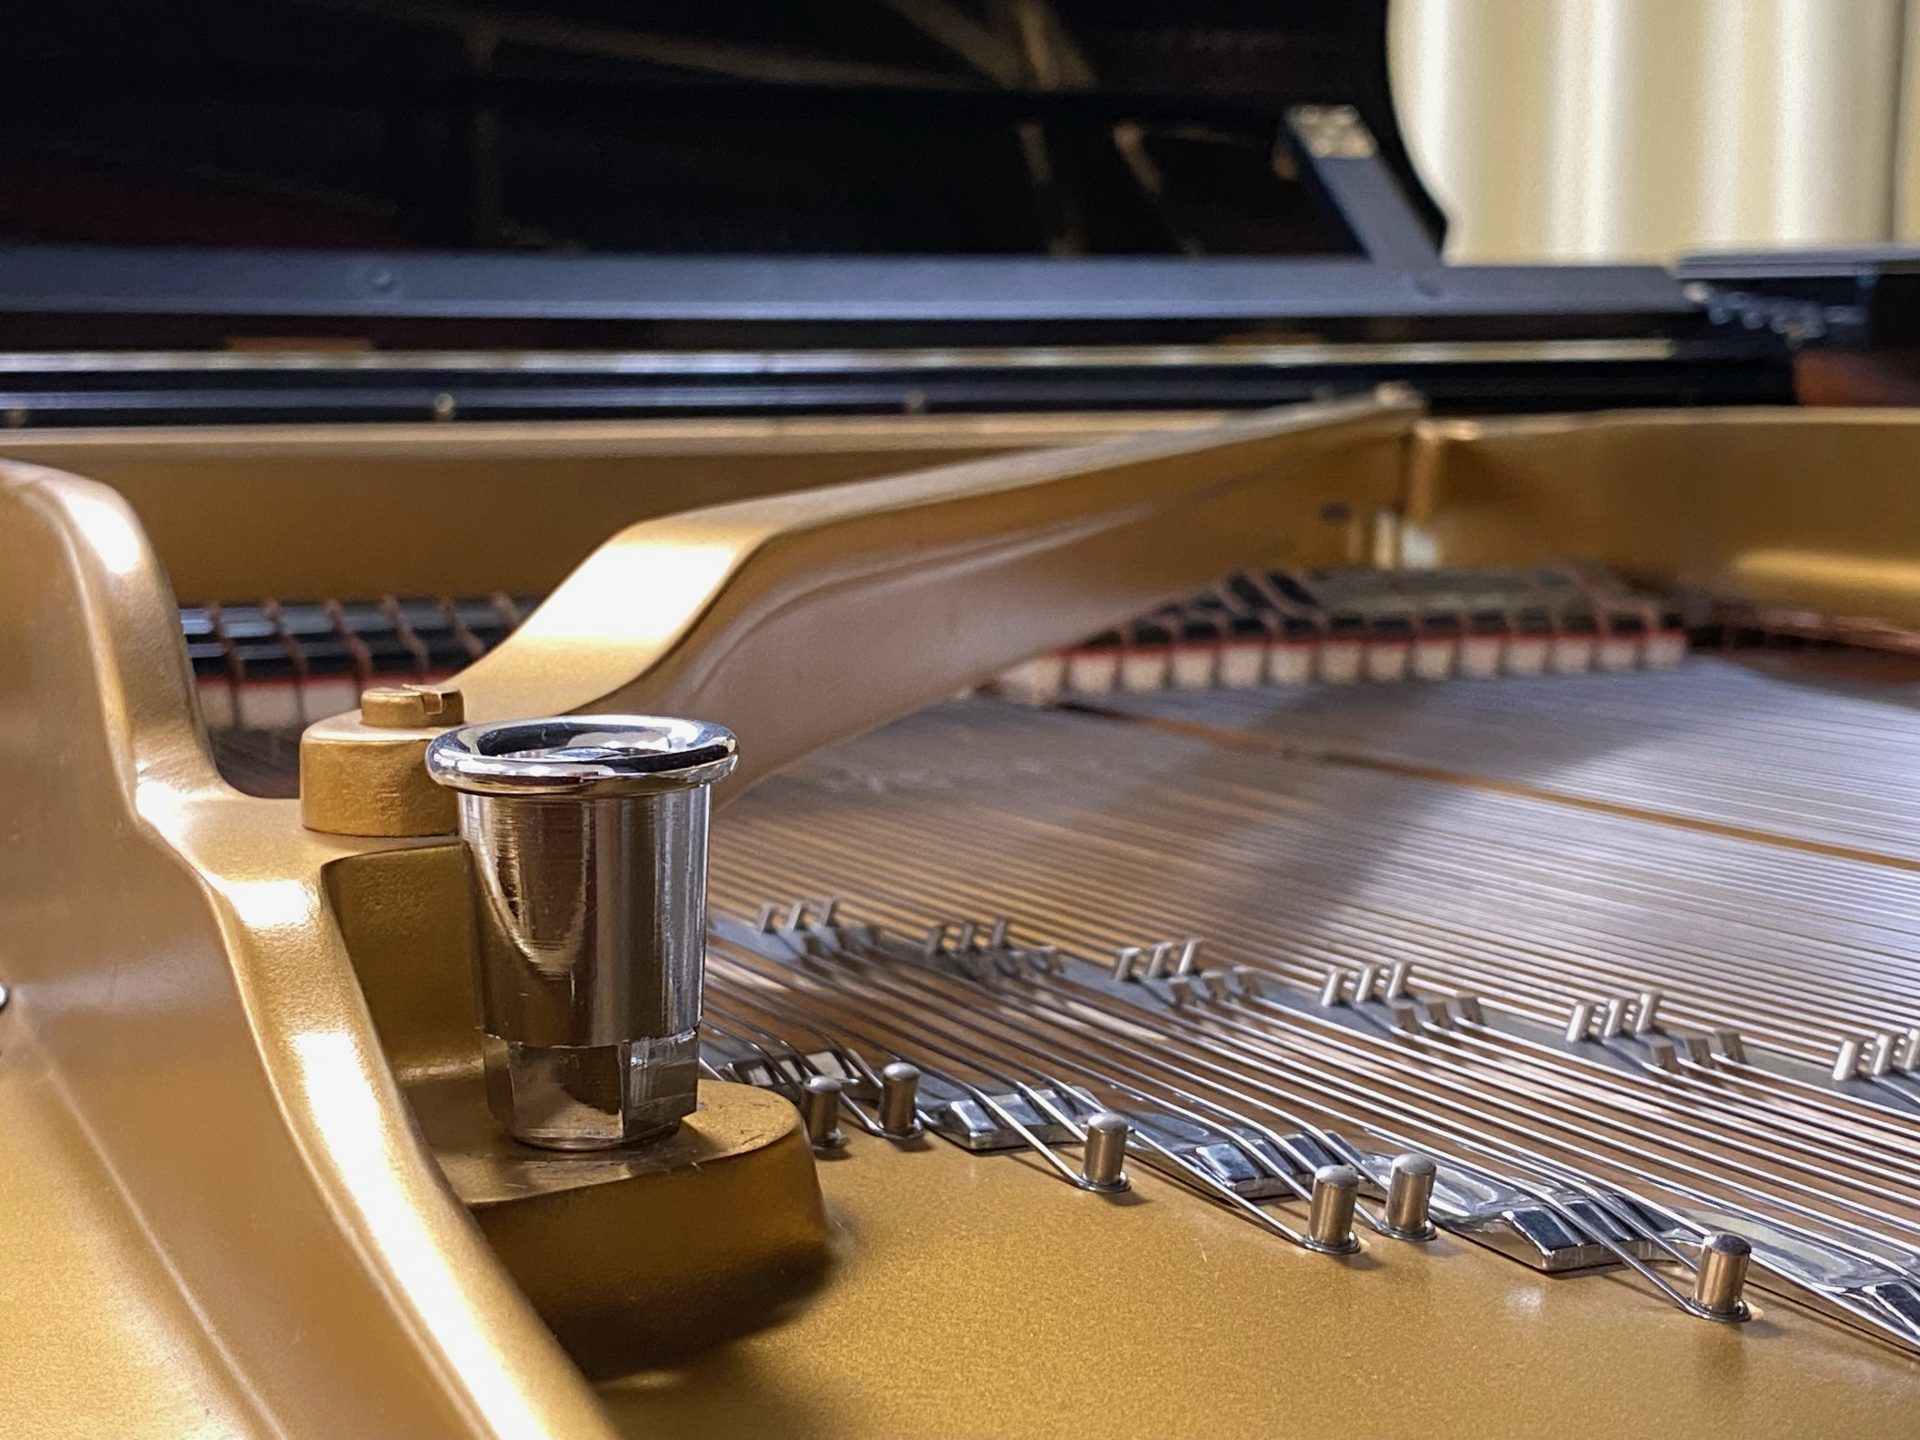 Steinway & Sons
D-274